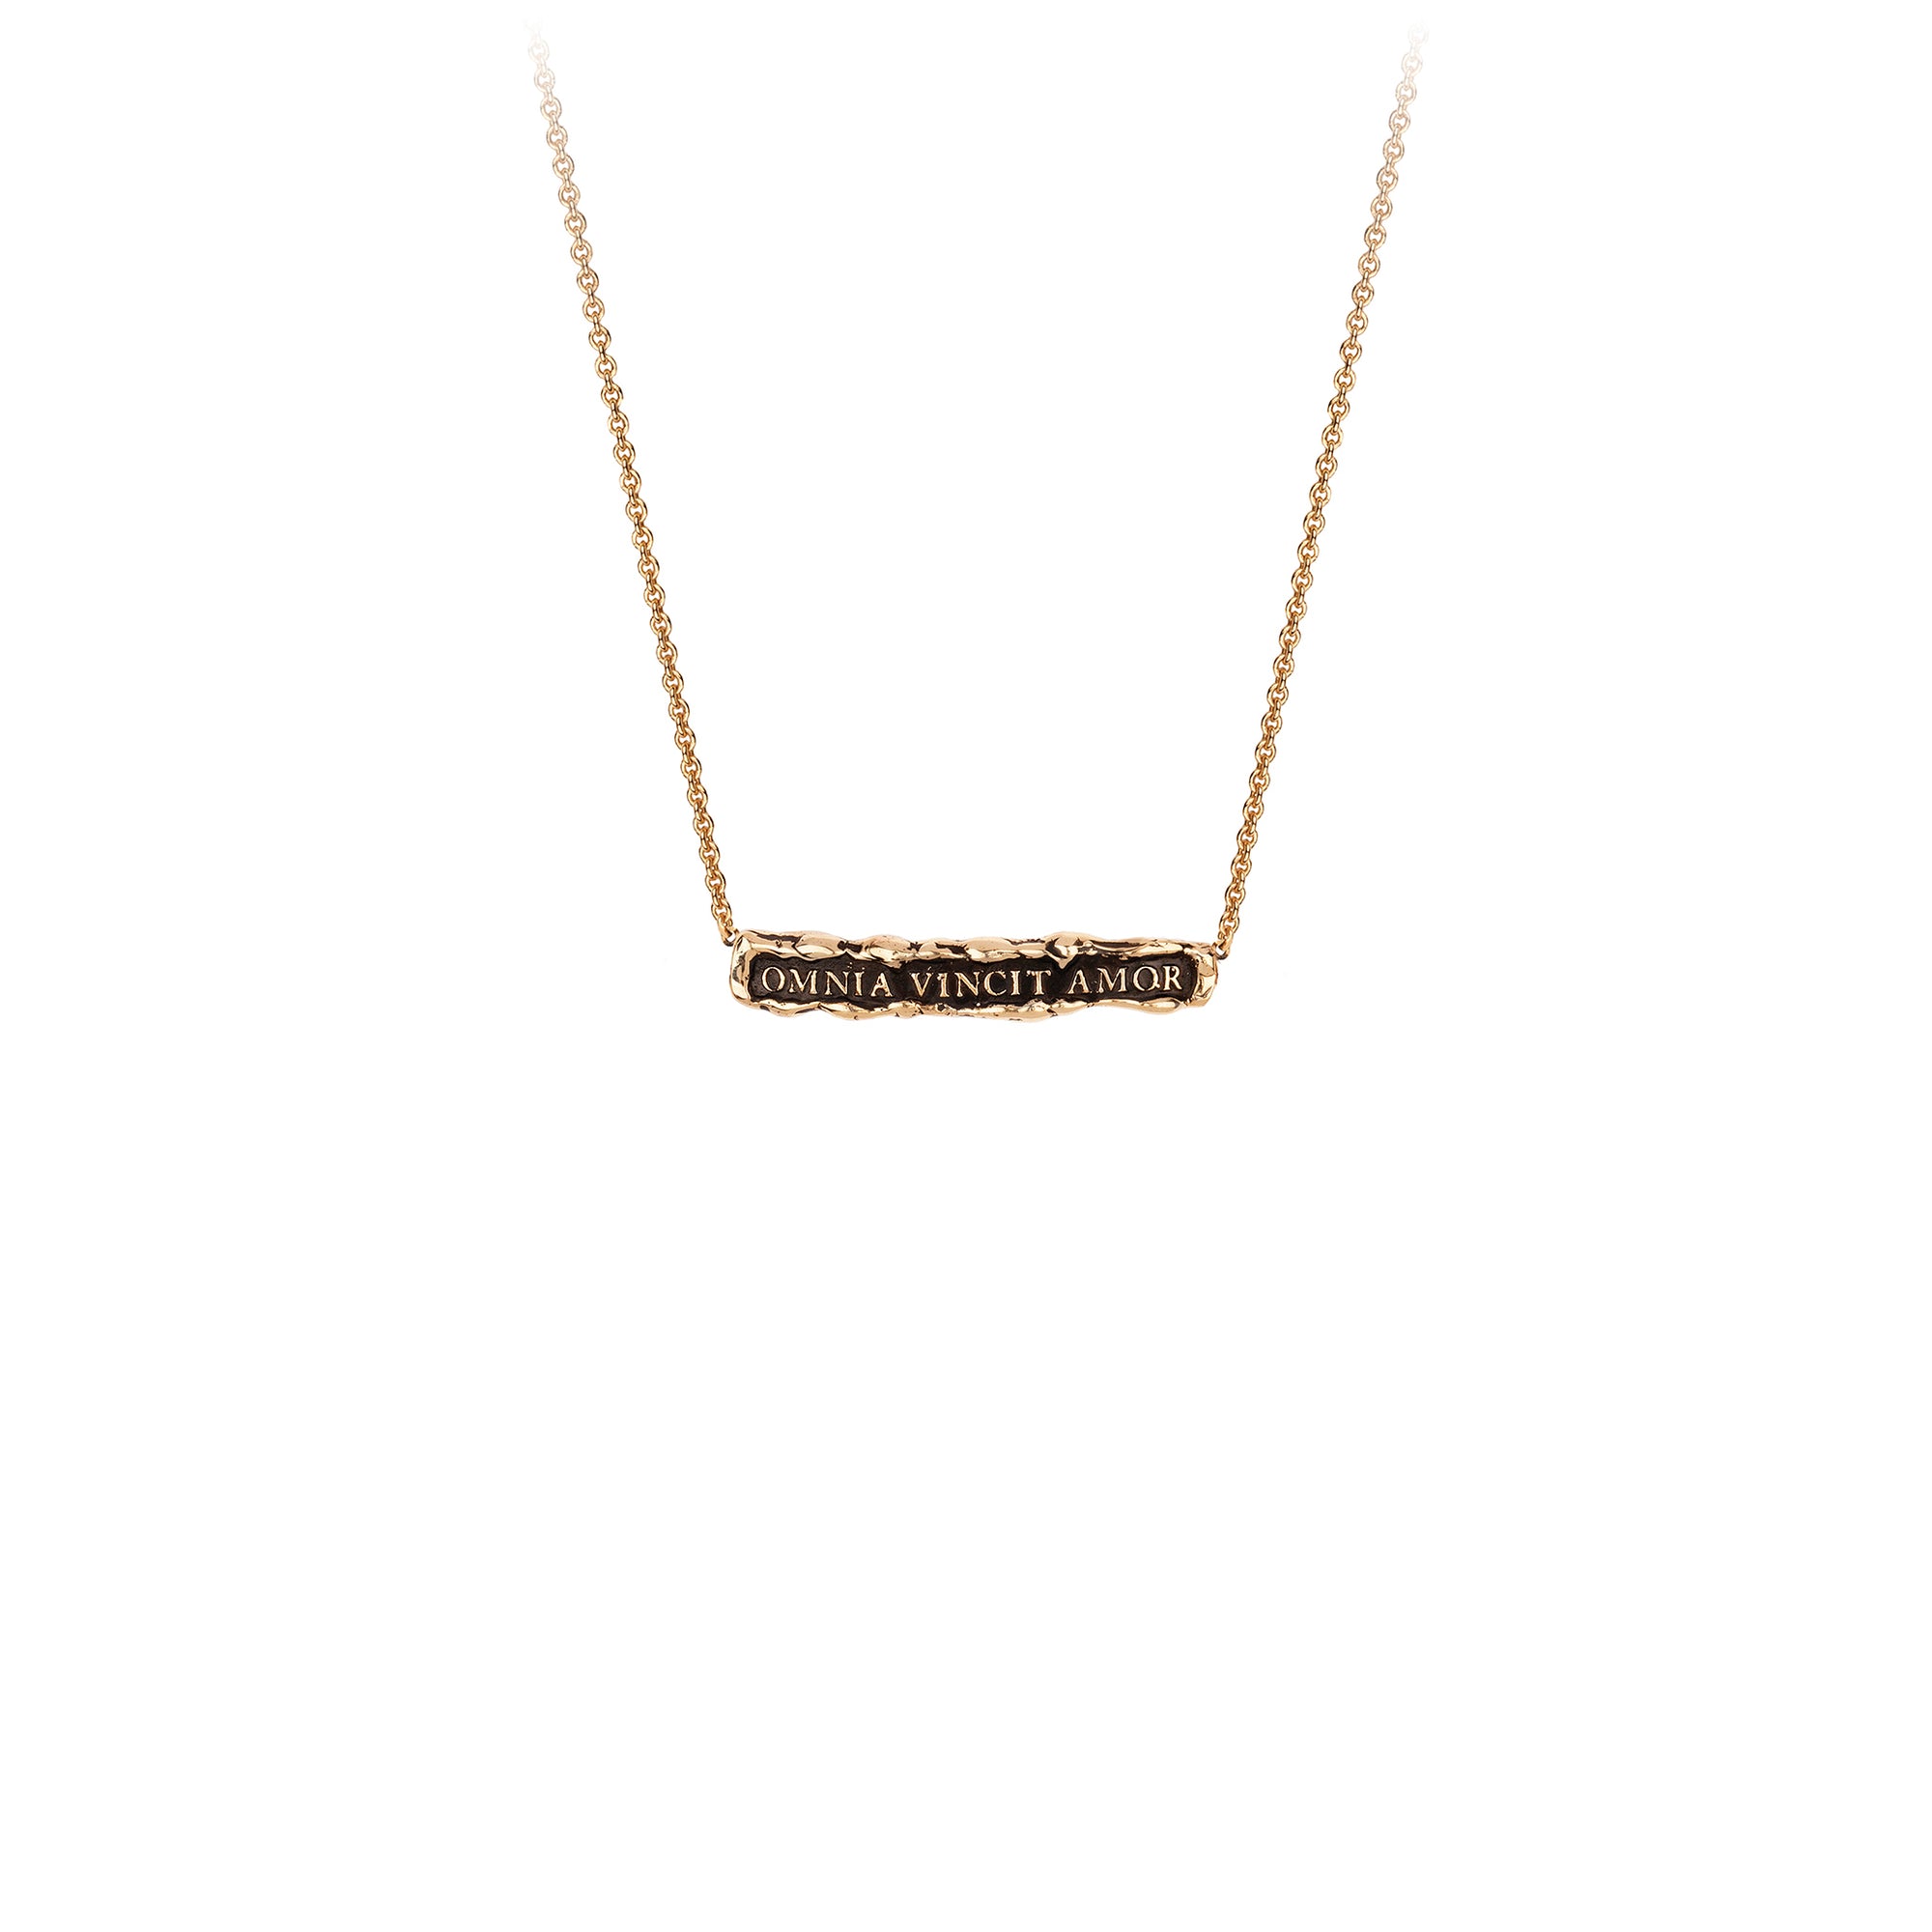 A 14k gold chain featuring a gold bar with our Omnia Vincit Amor engraving.